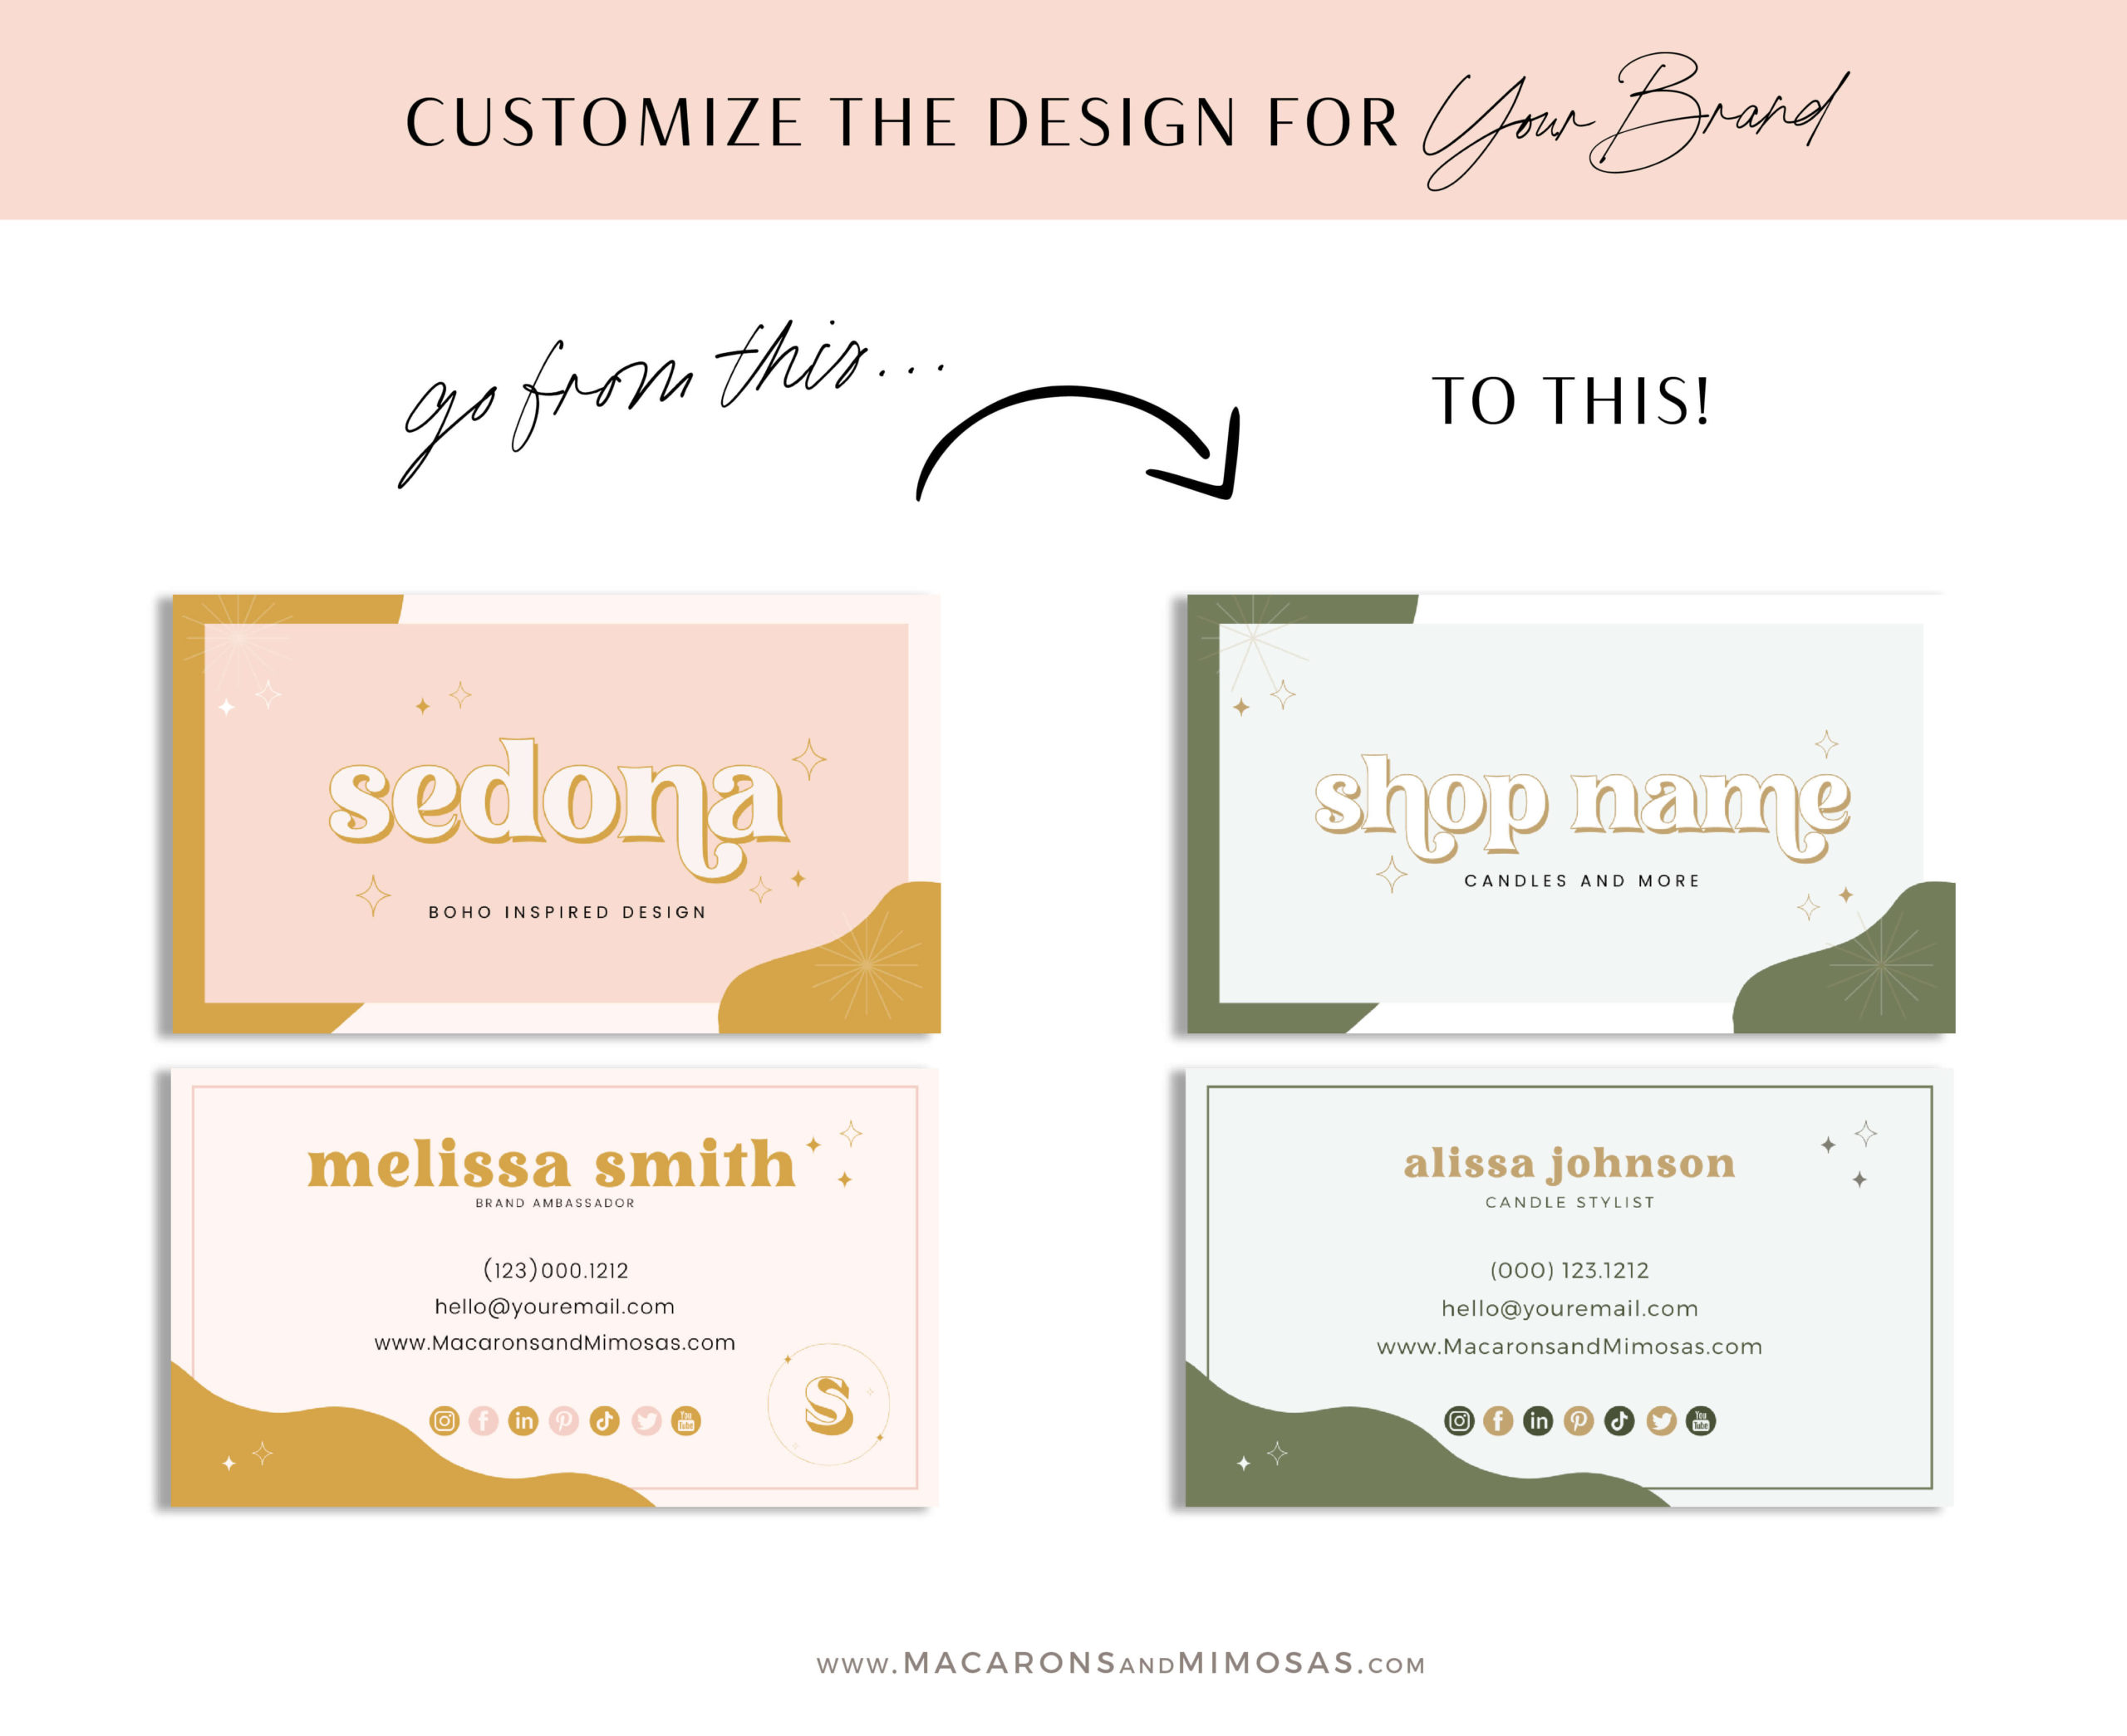 Boho Business Card Template for Canva, How to create DIY Modern Retro Pink Bohemian Business Card Designs, Pink Boho Business Card Template